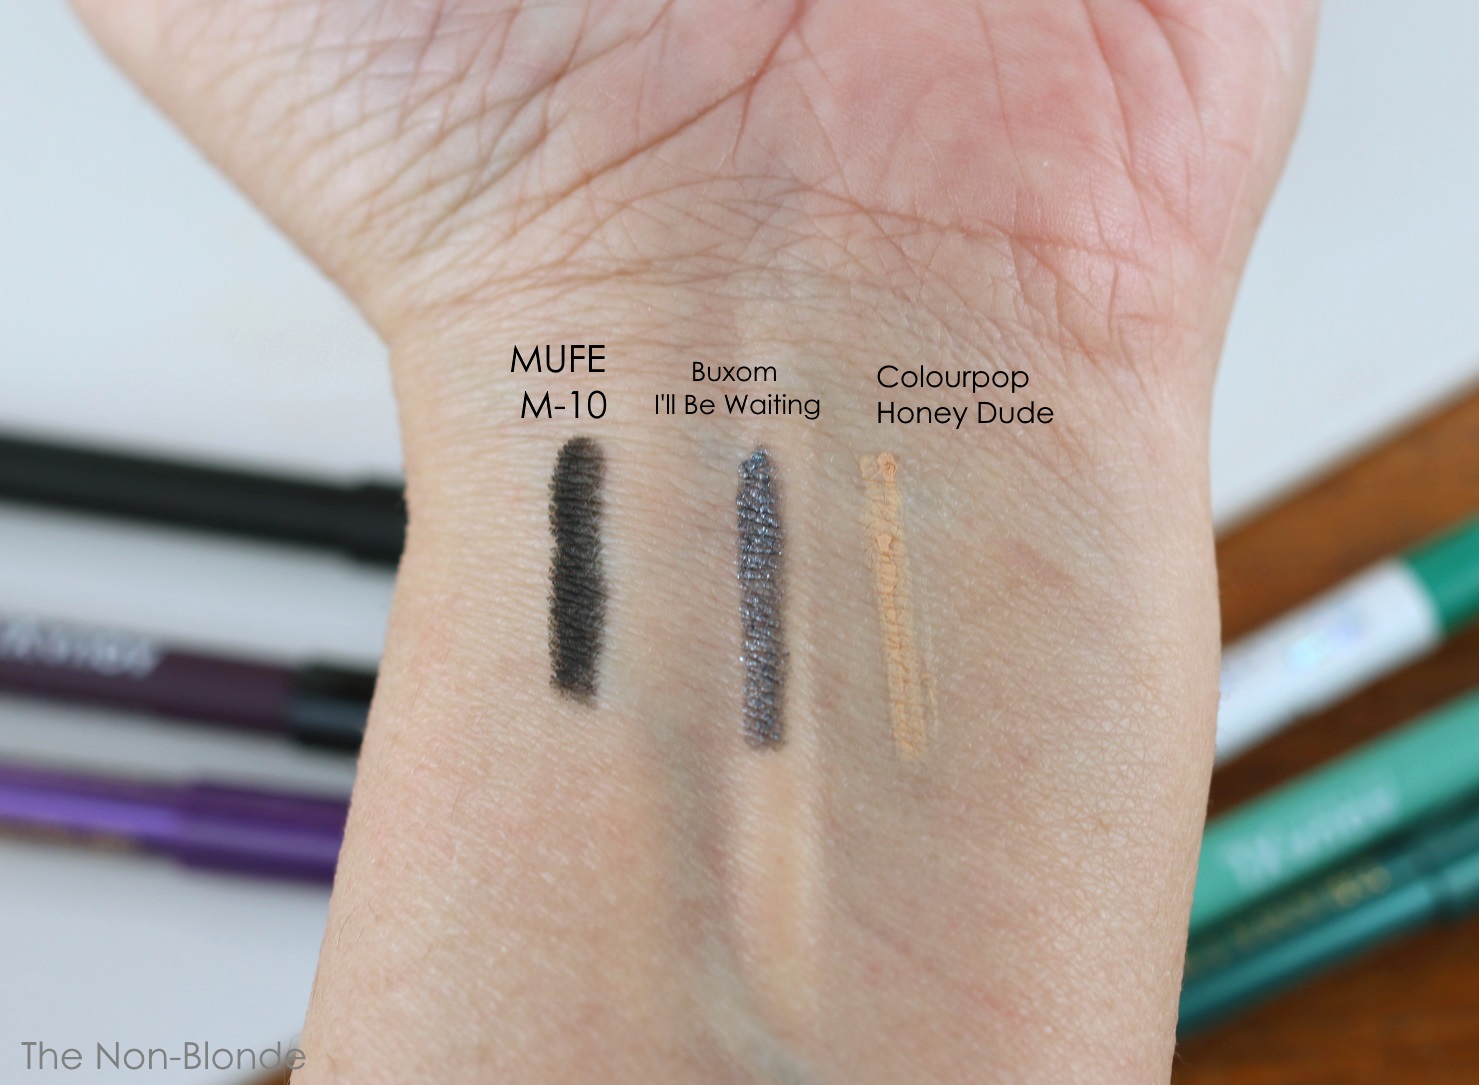 Marc Jacobs Beauty (Plum)age (60) Highliner Gel Crayon Review & Swatches